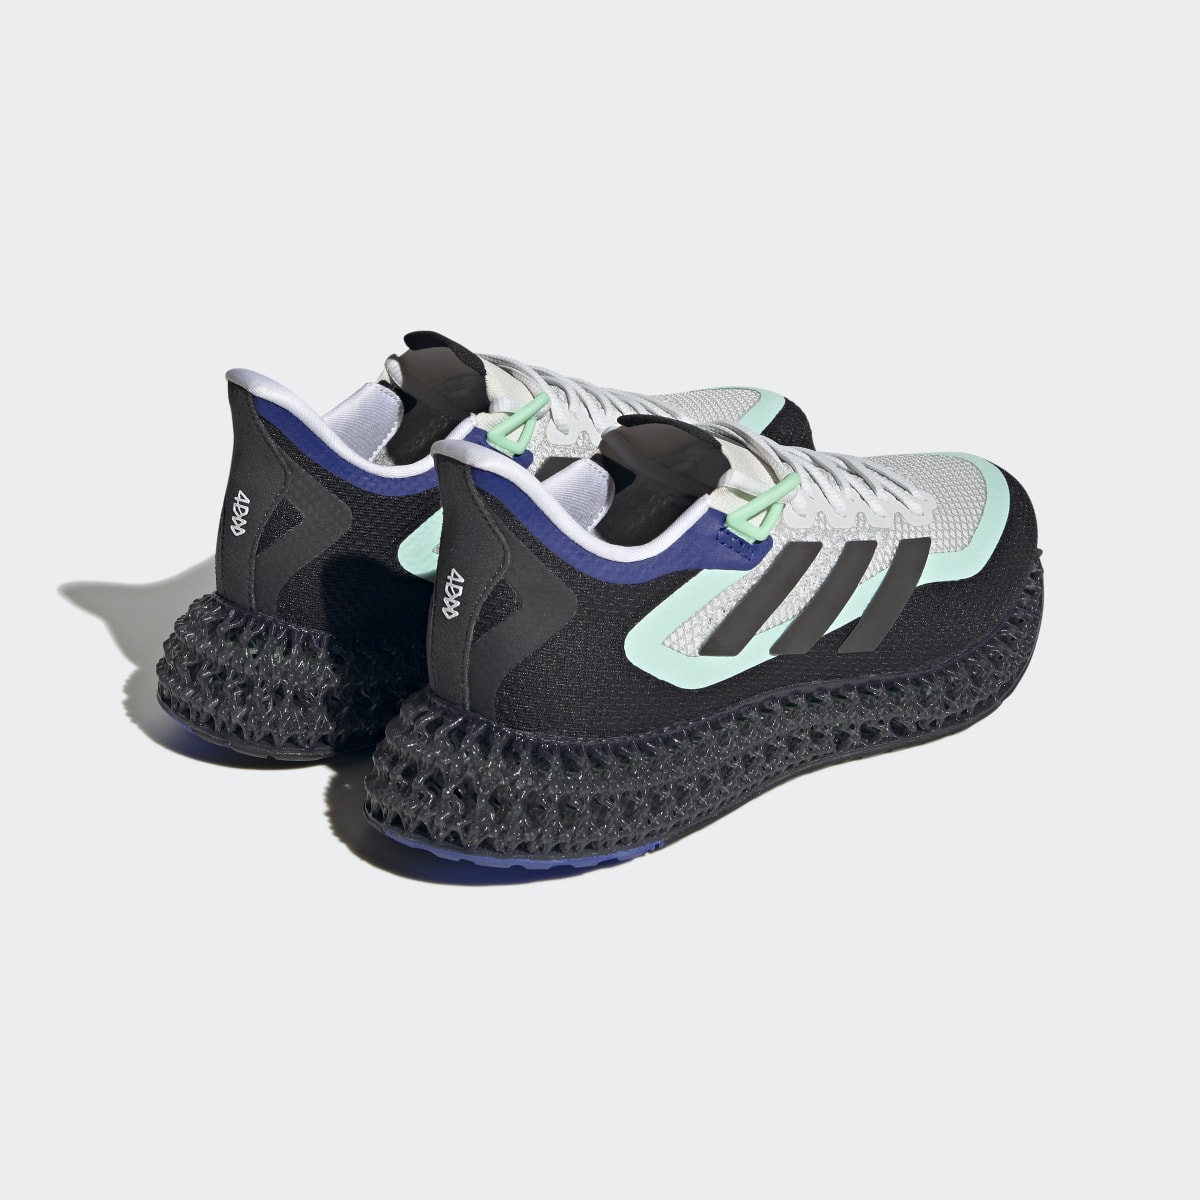 Adidas 4D FWD Shoes. 12